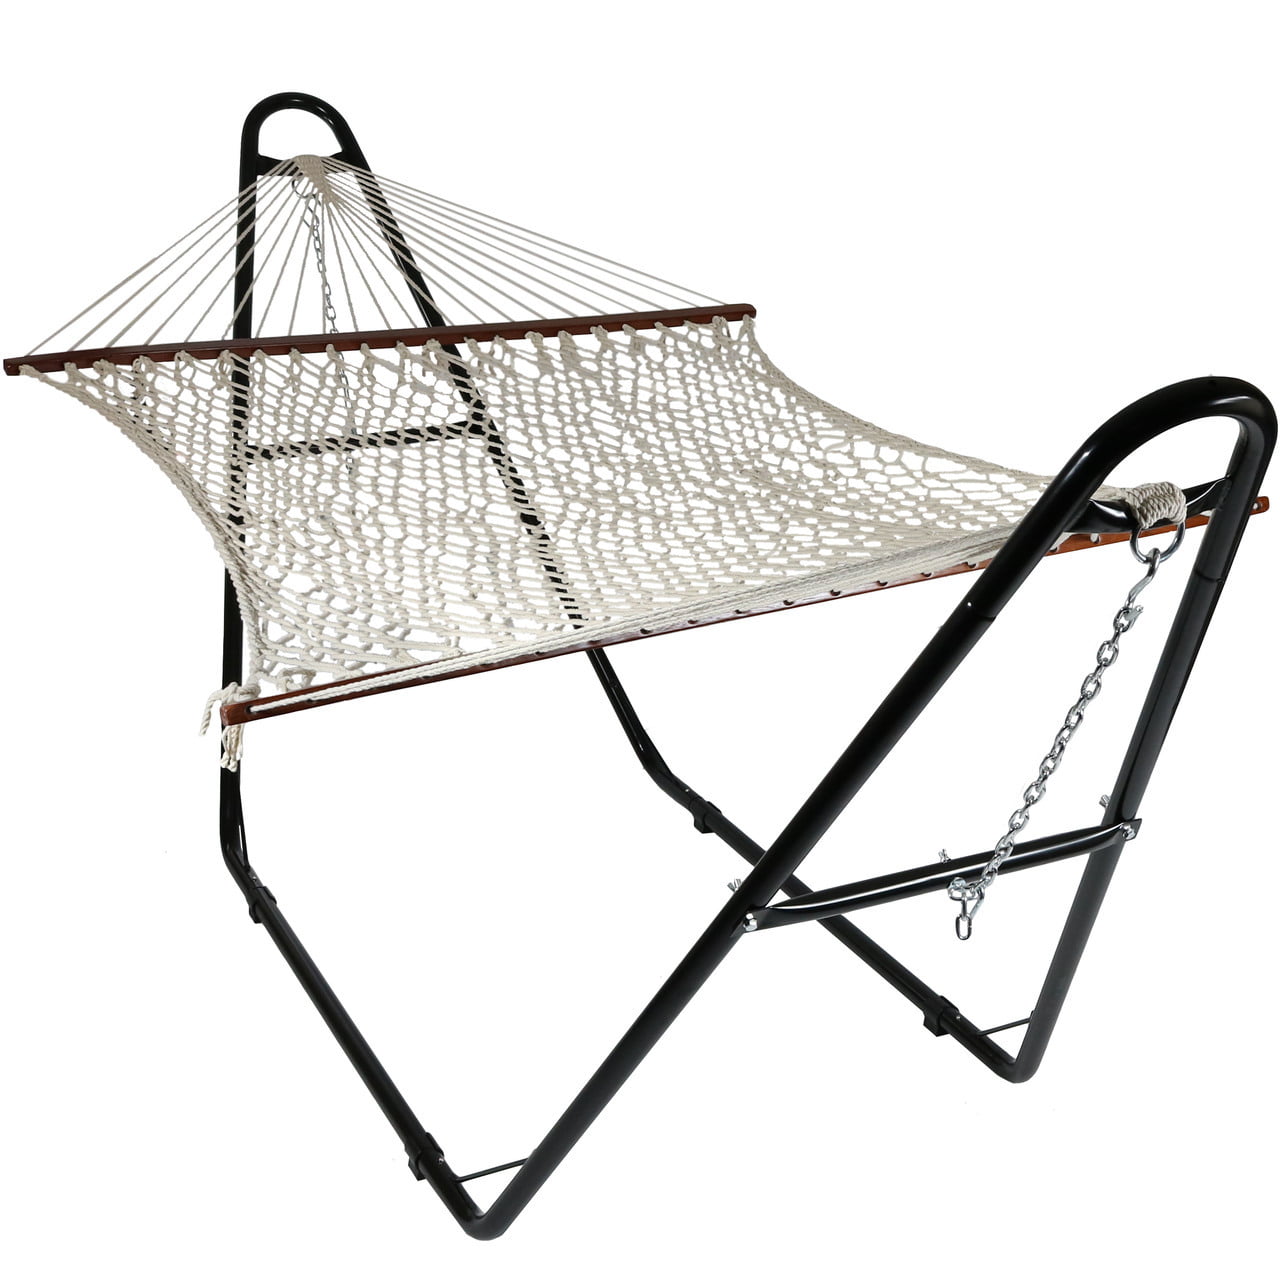 Unfinished Wood Spreader Bars Sunnydaze Cotton Rope Hammock with Stand